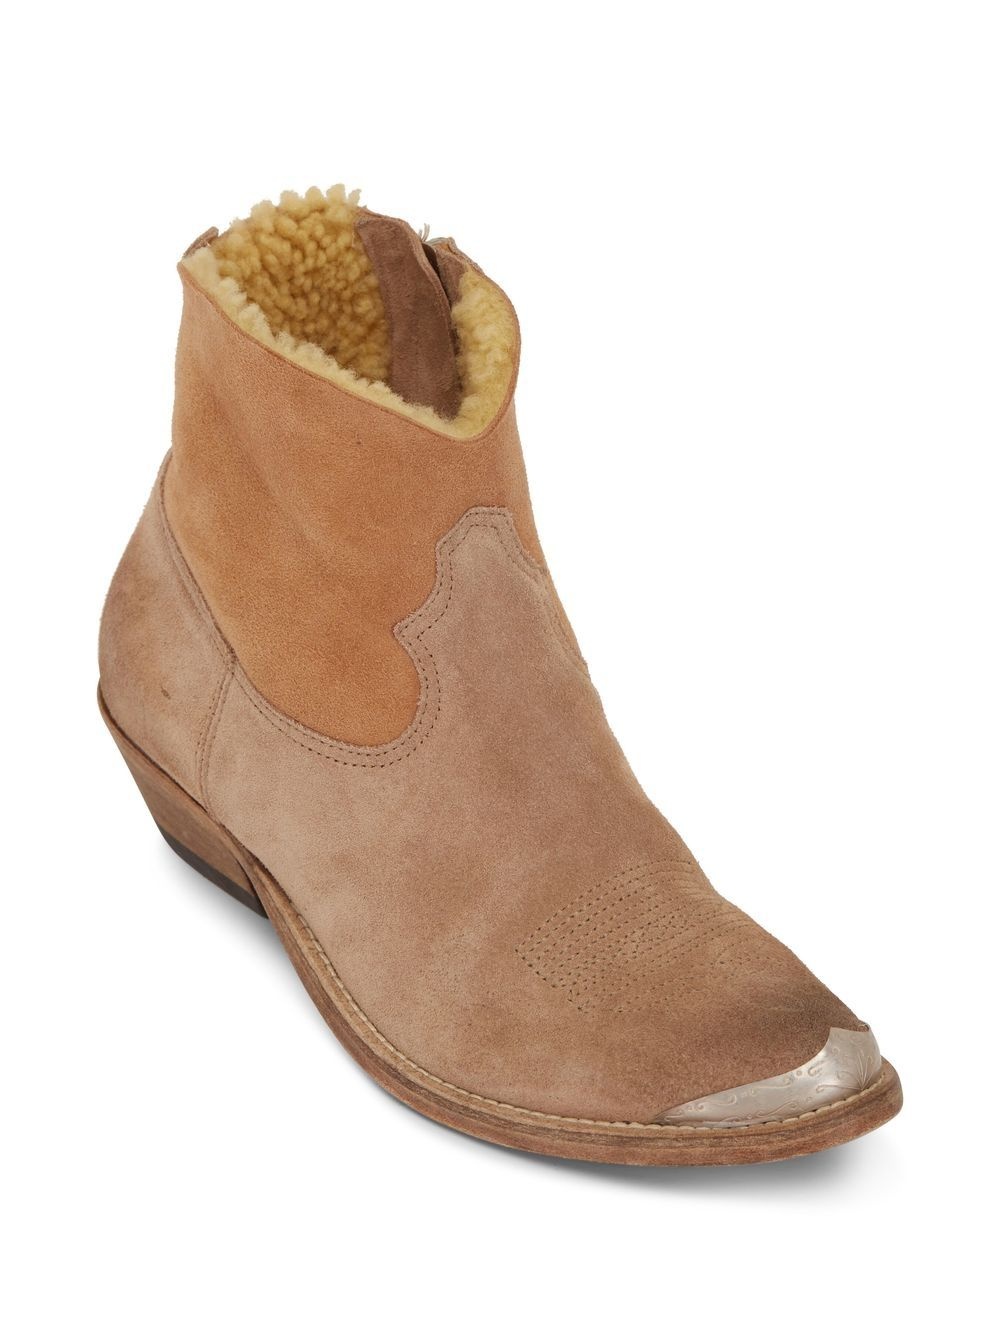 shearling-lined Western ankle boots - 2